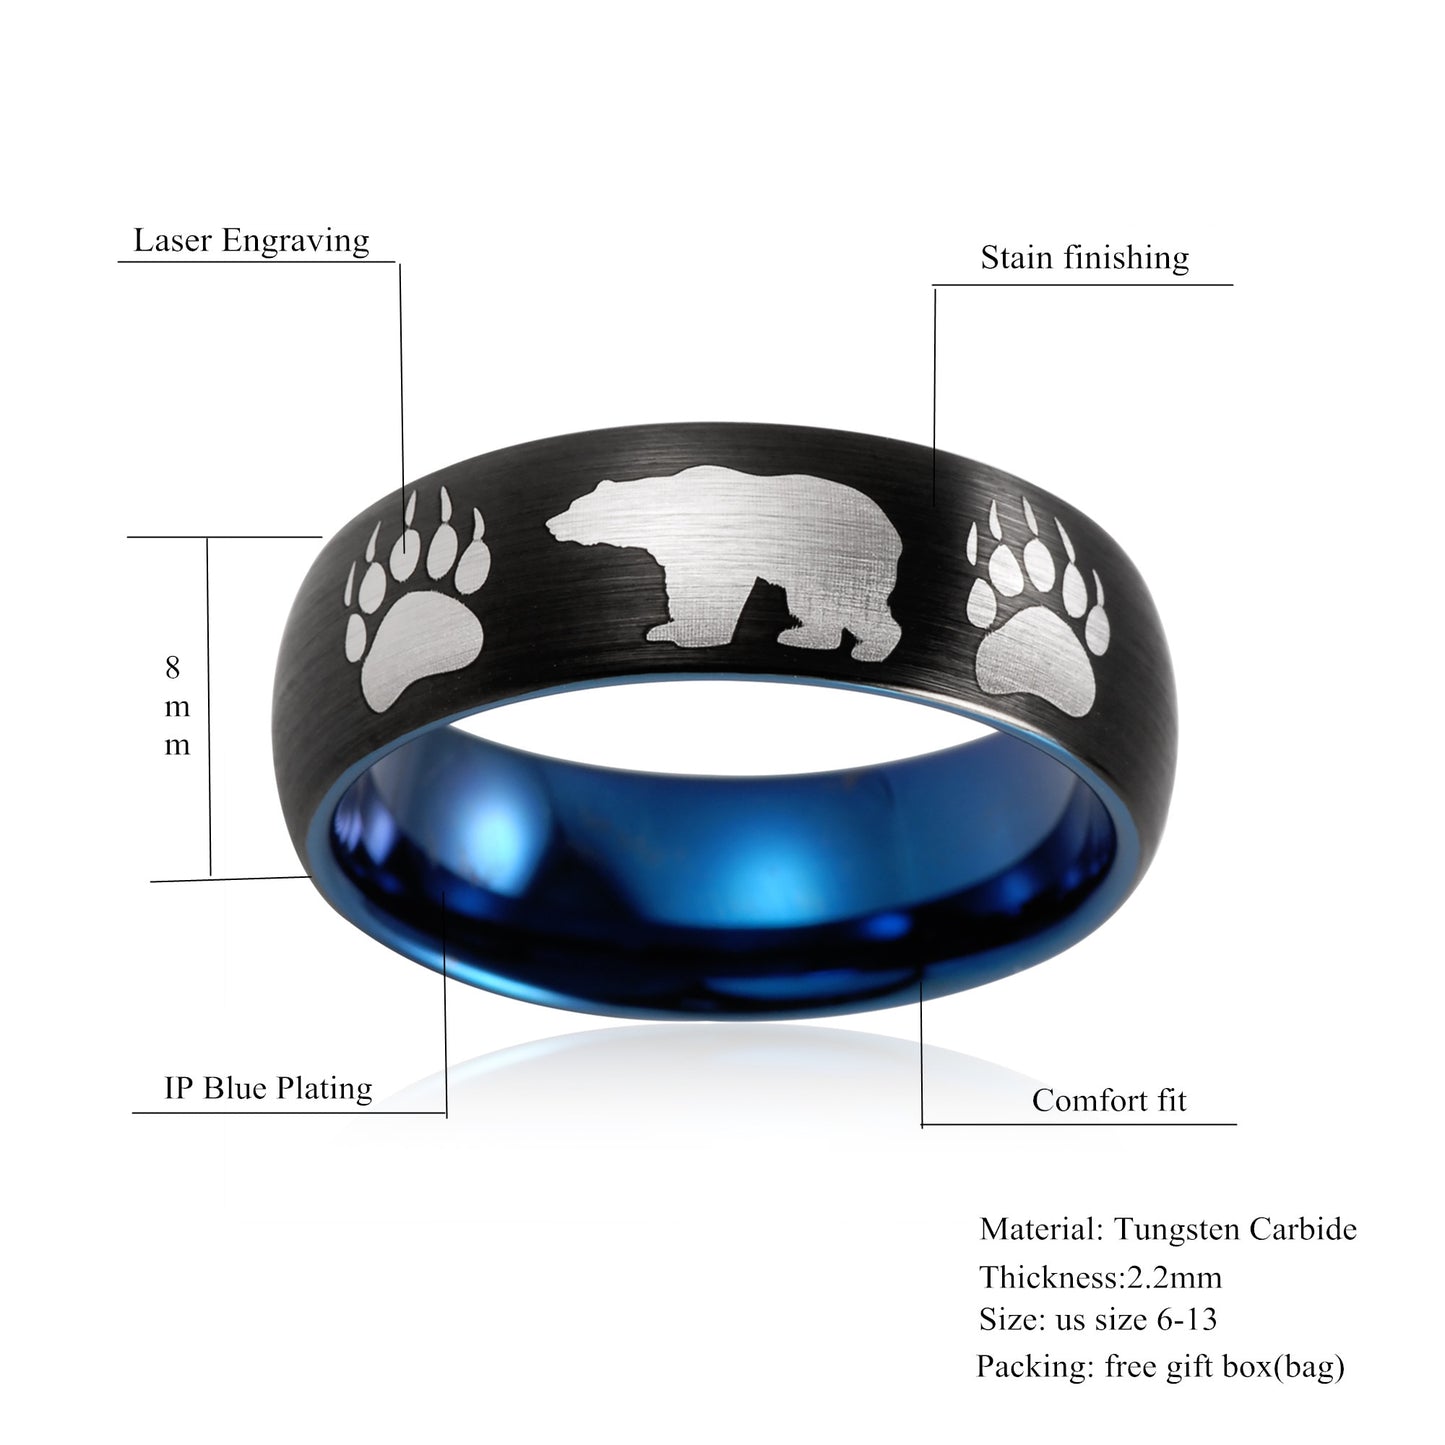 8mm Grizzly Bear & Paw Print Black Blue Tungsten Unisex Ring